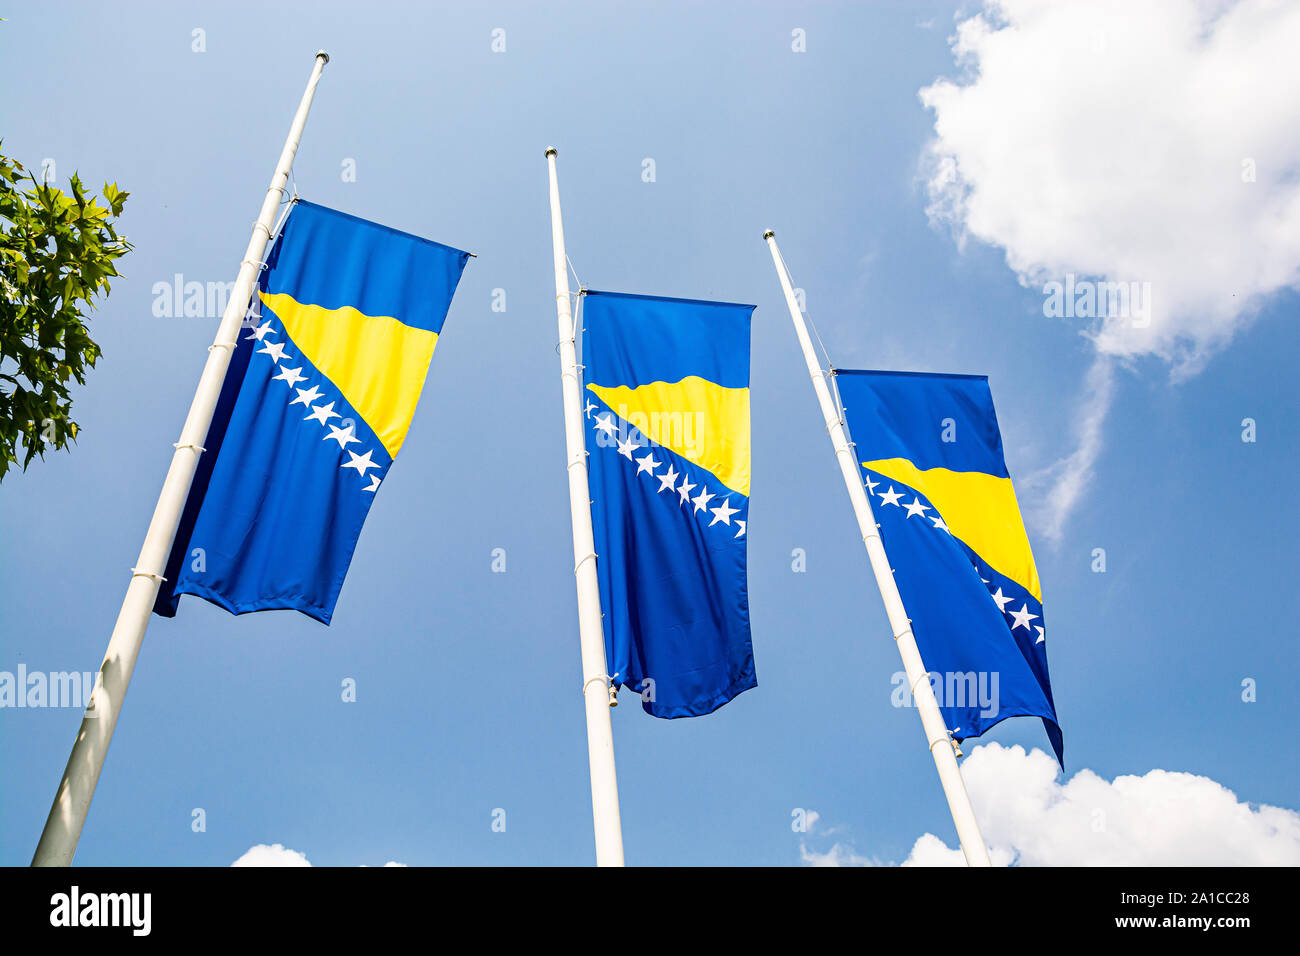 Three bosnian flags in wind on blue sky with clouds Stock Photo